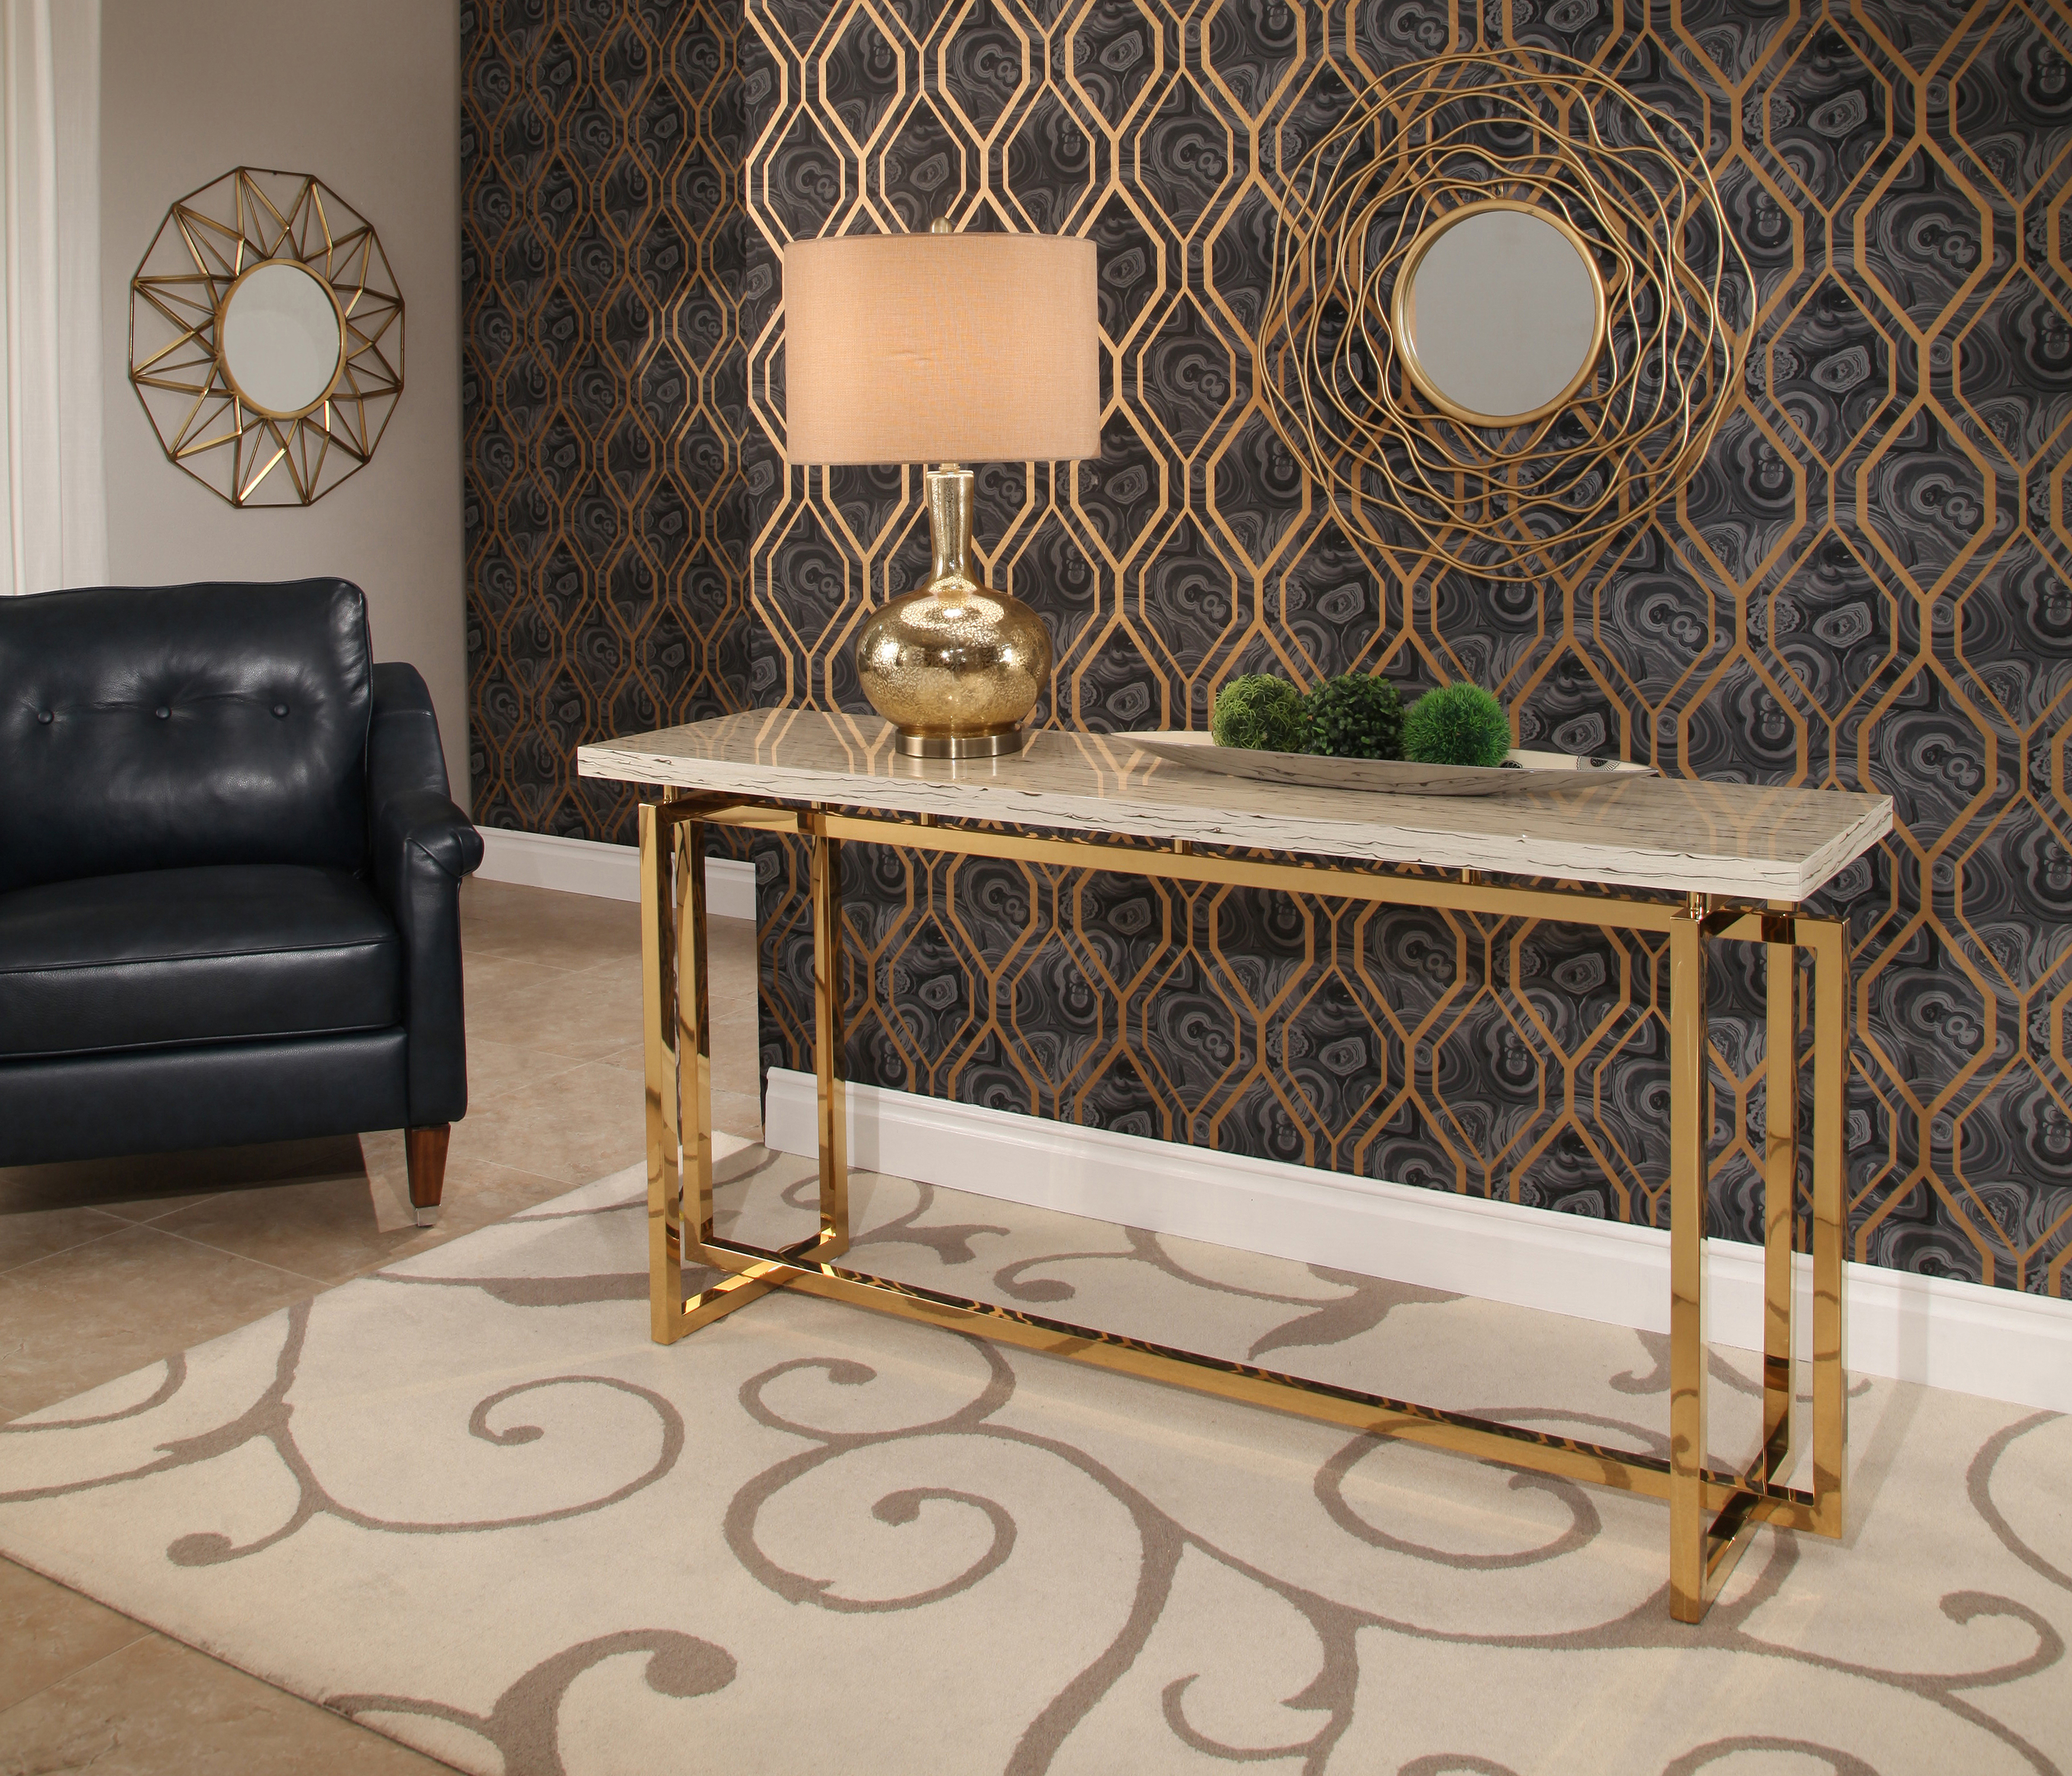 Archer stainless steel sofa table with gold legs and a fiberboard top from Abbyson Living